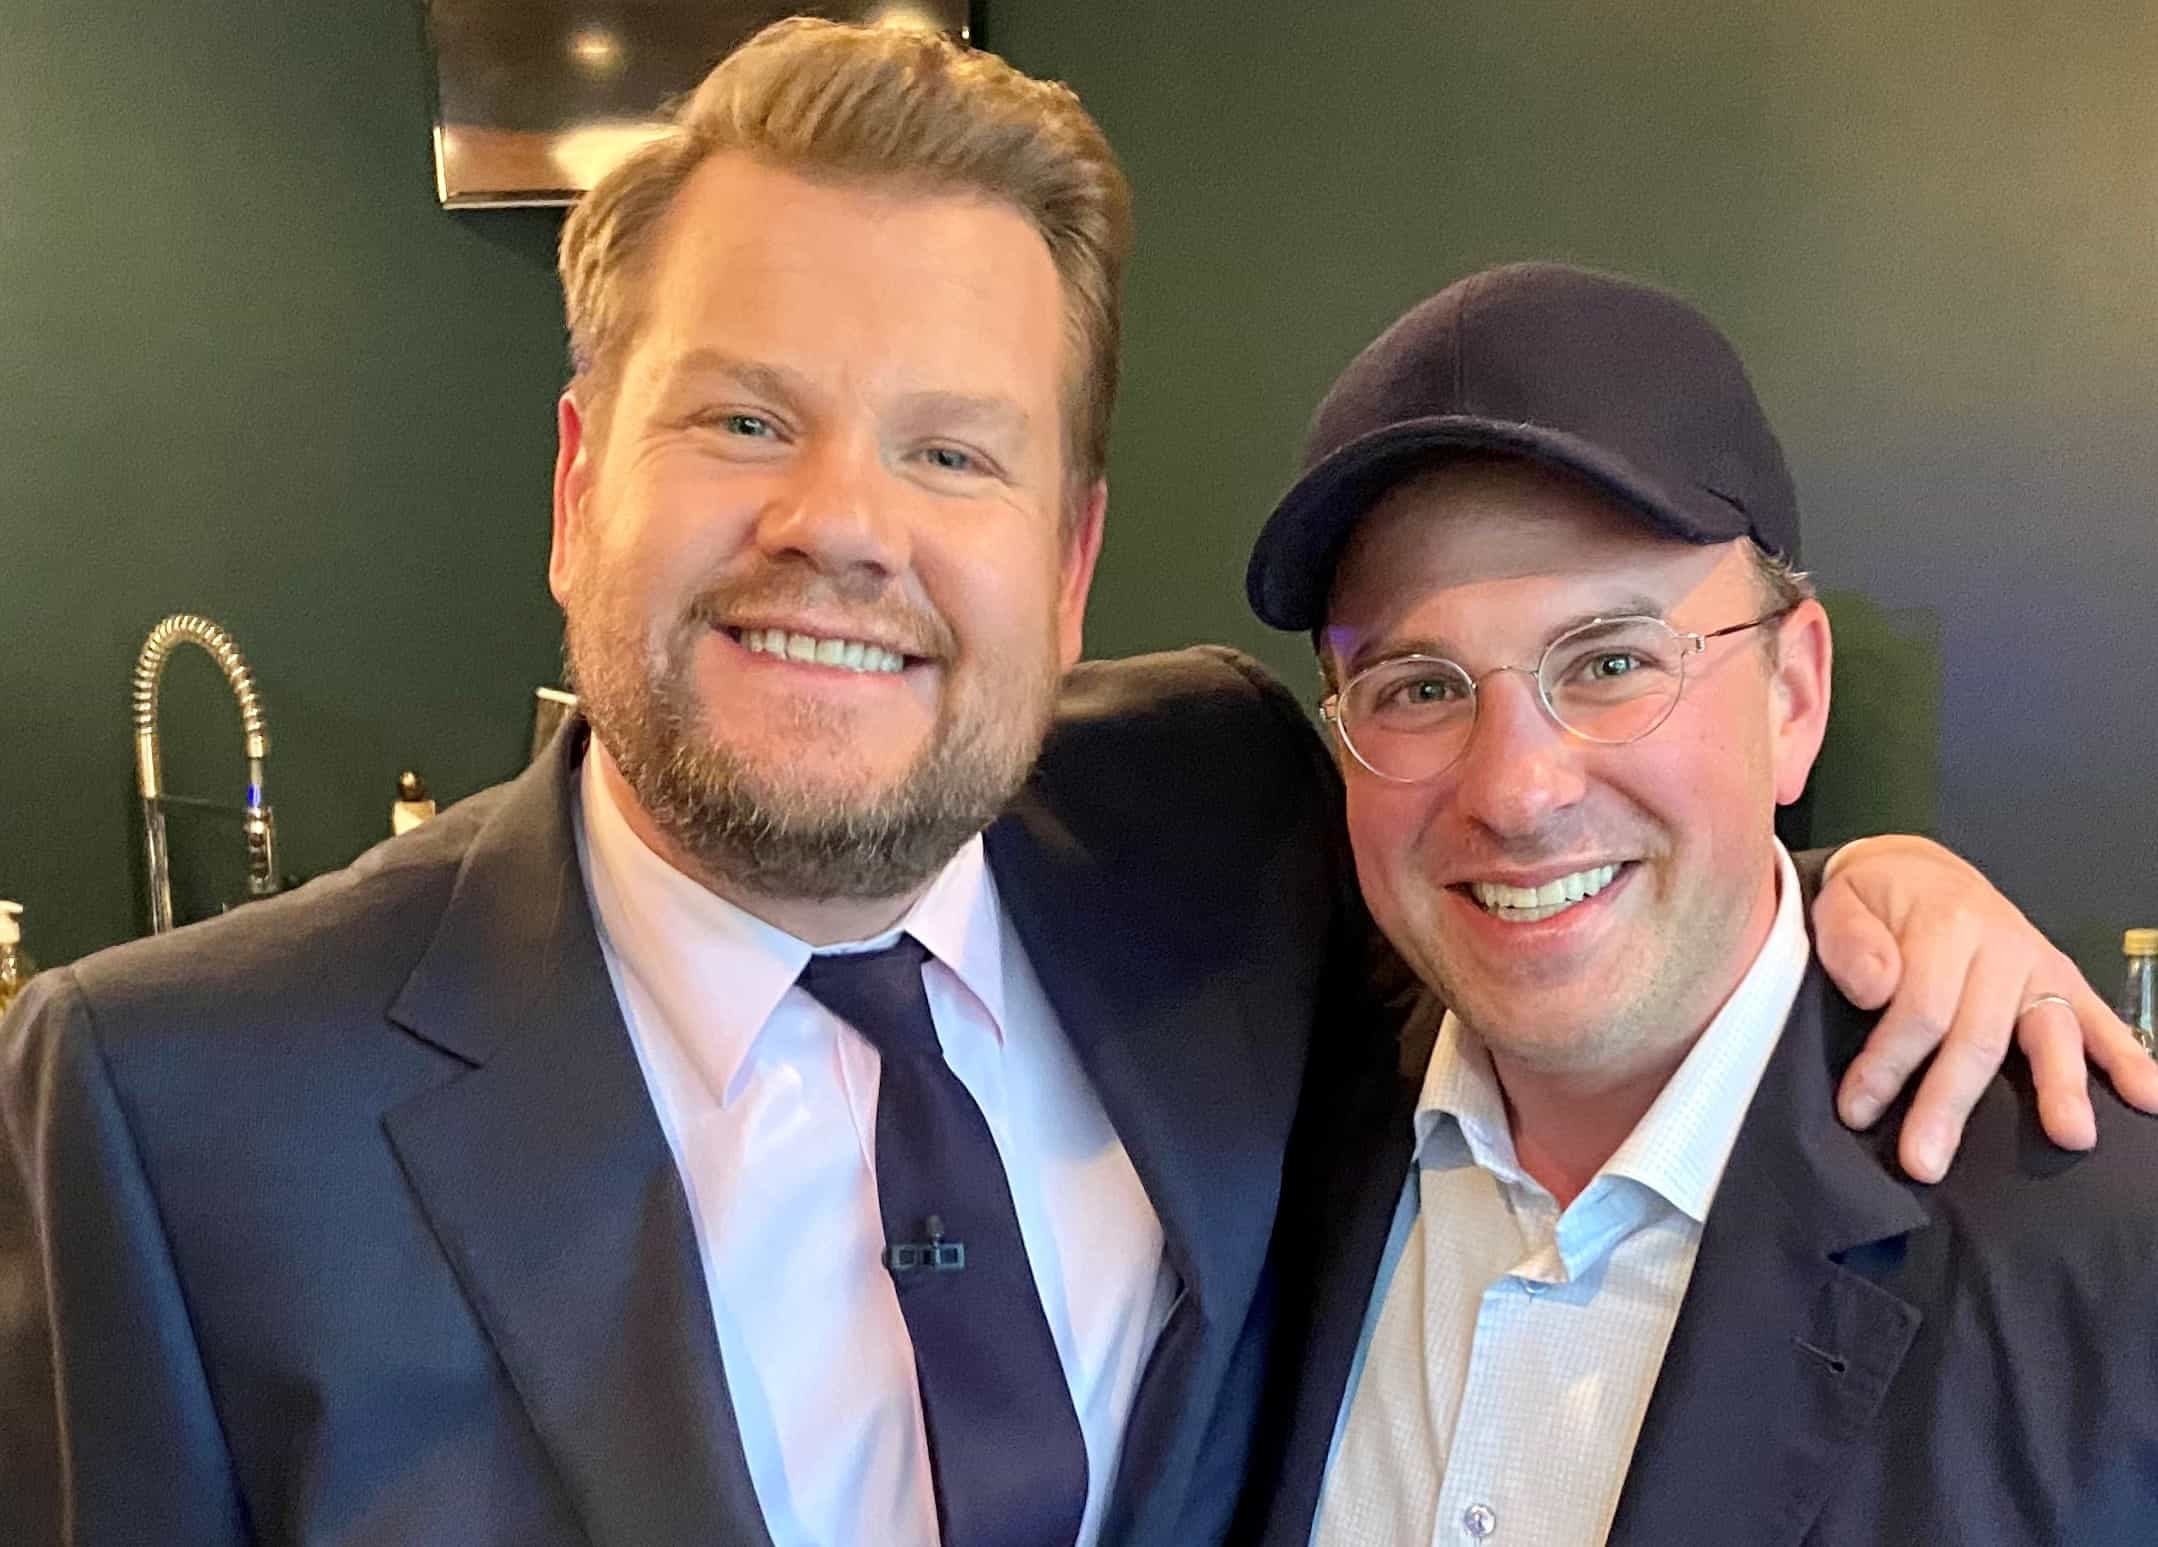 Israel Schachter with actor and comedian James Corden at The Late Late Show with James Corden in Los Angeles. Credit: Courtesy.